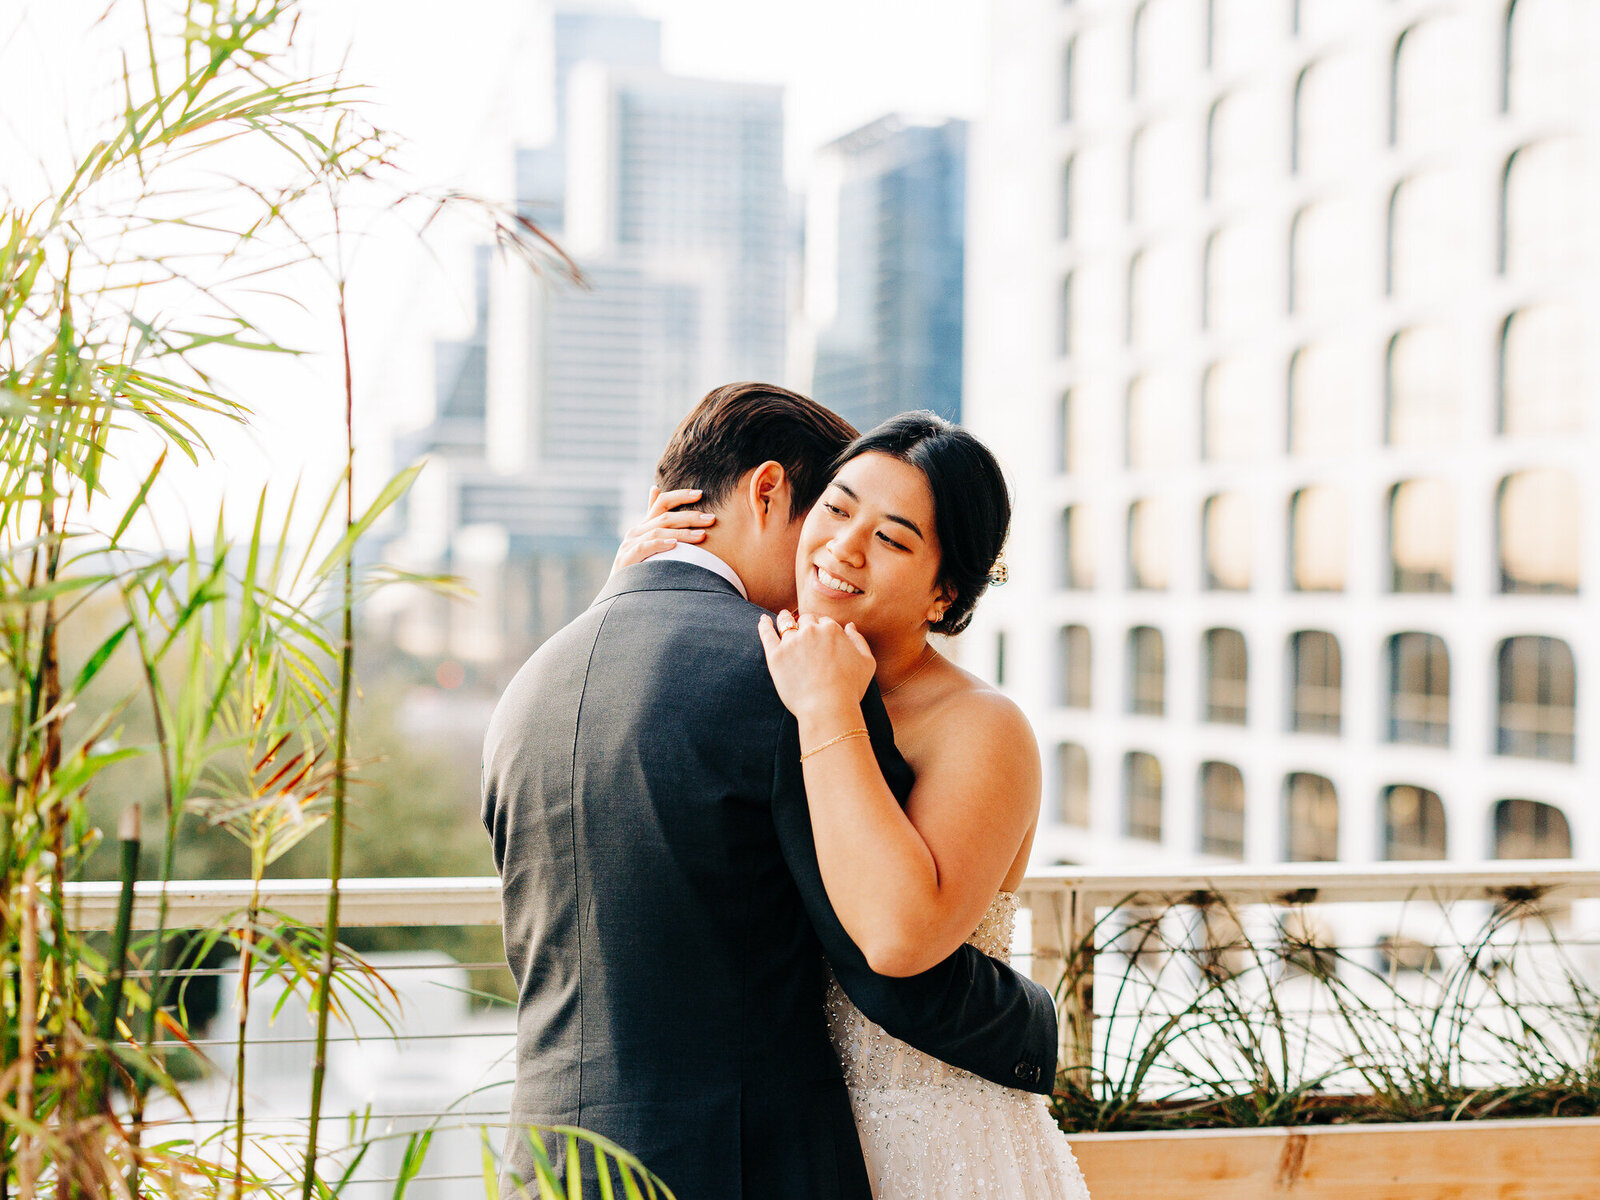 This image features a Vietnamese couple at The Line Hotel in their wedding attire. The groom is wrapping around his bride at the waist as she wraps around him, resting one hand on his shoulder and the other on the back of his neck. The groom is softly kissing her neck. The image was taken by San Antonio Wedding Photographer KD Captures.